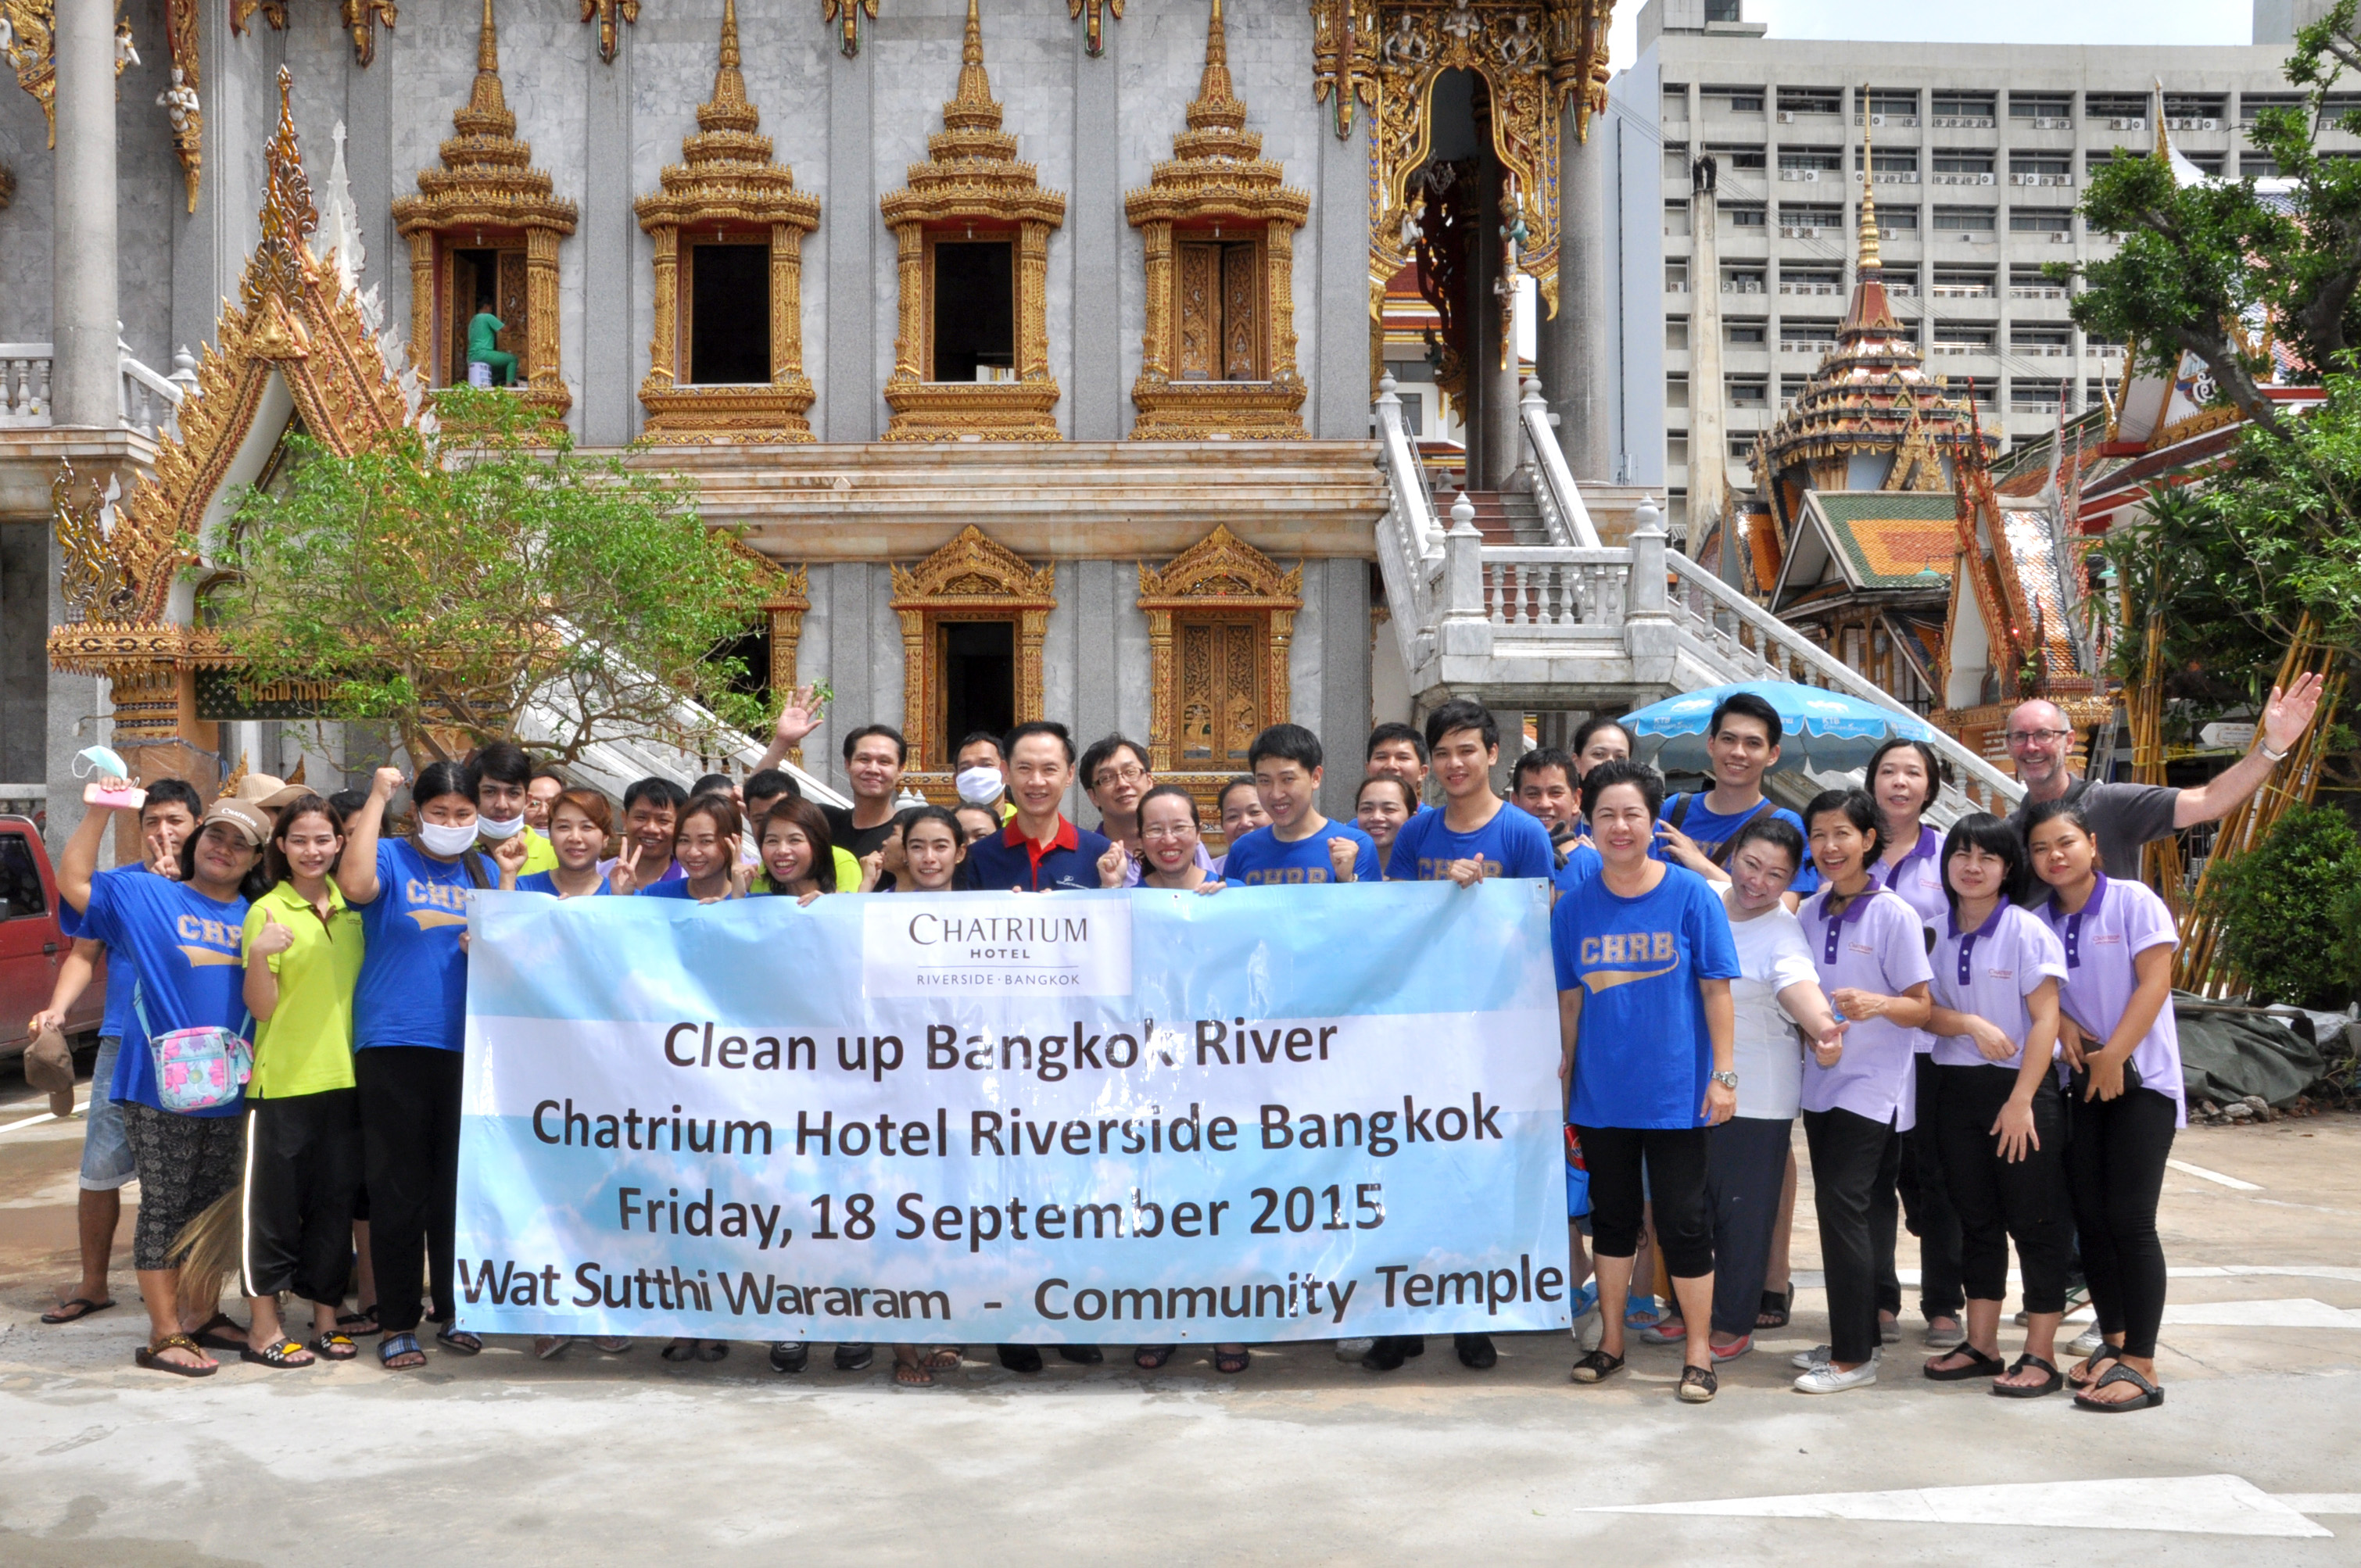 Chatrium Hotel Riverside Bangkok Staff at the Temple Cleaning Event